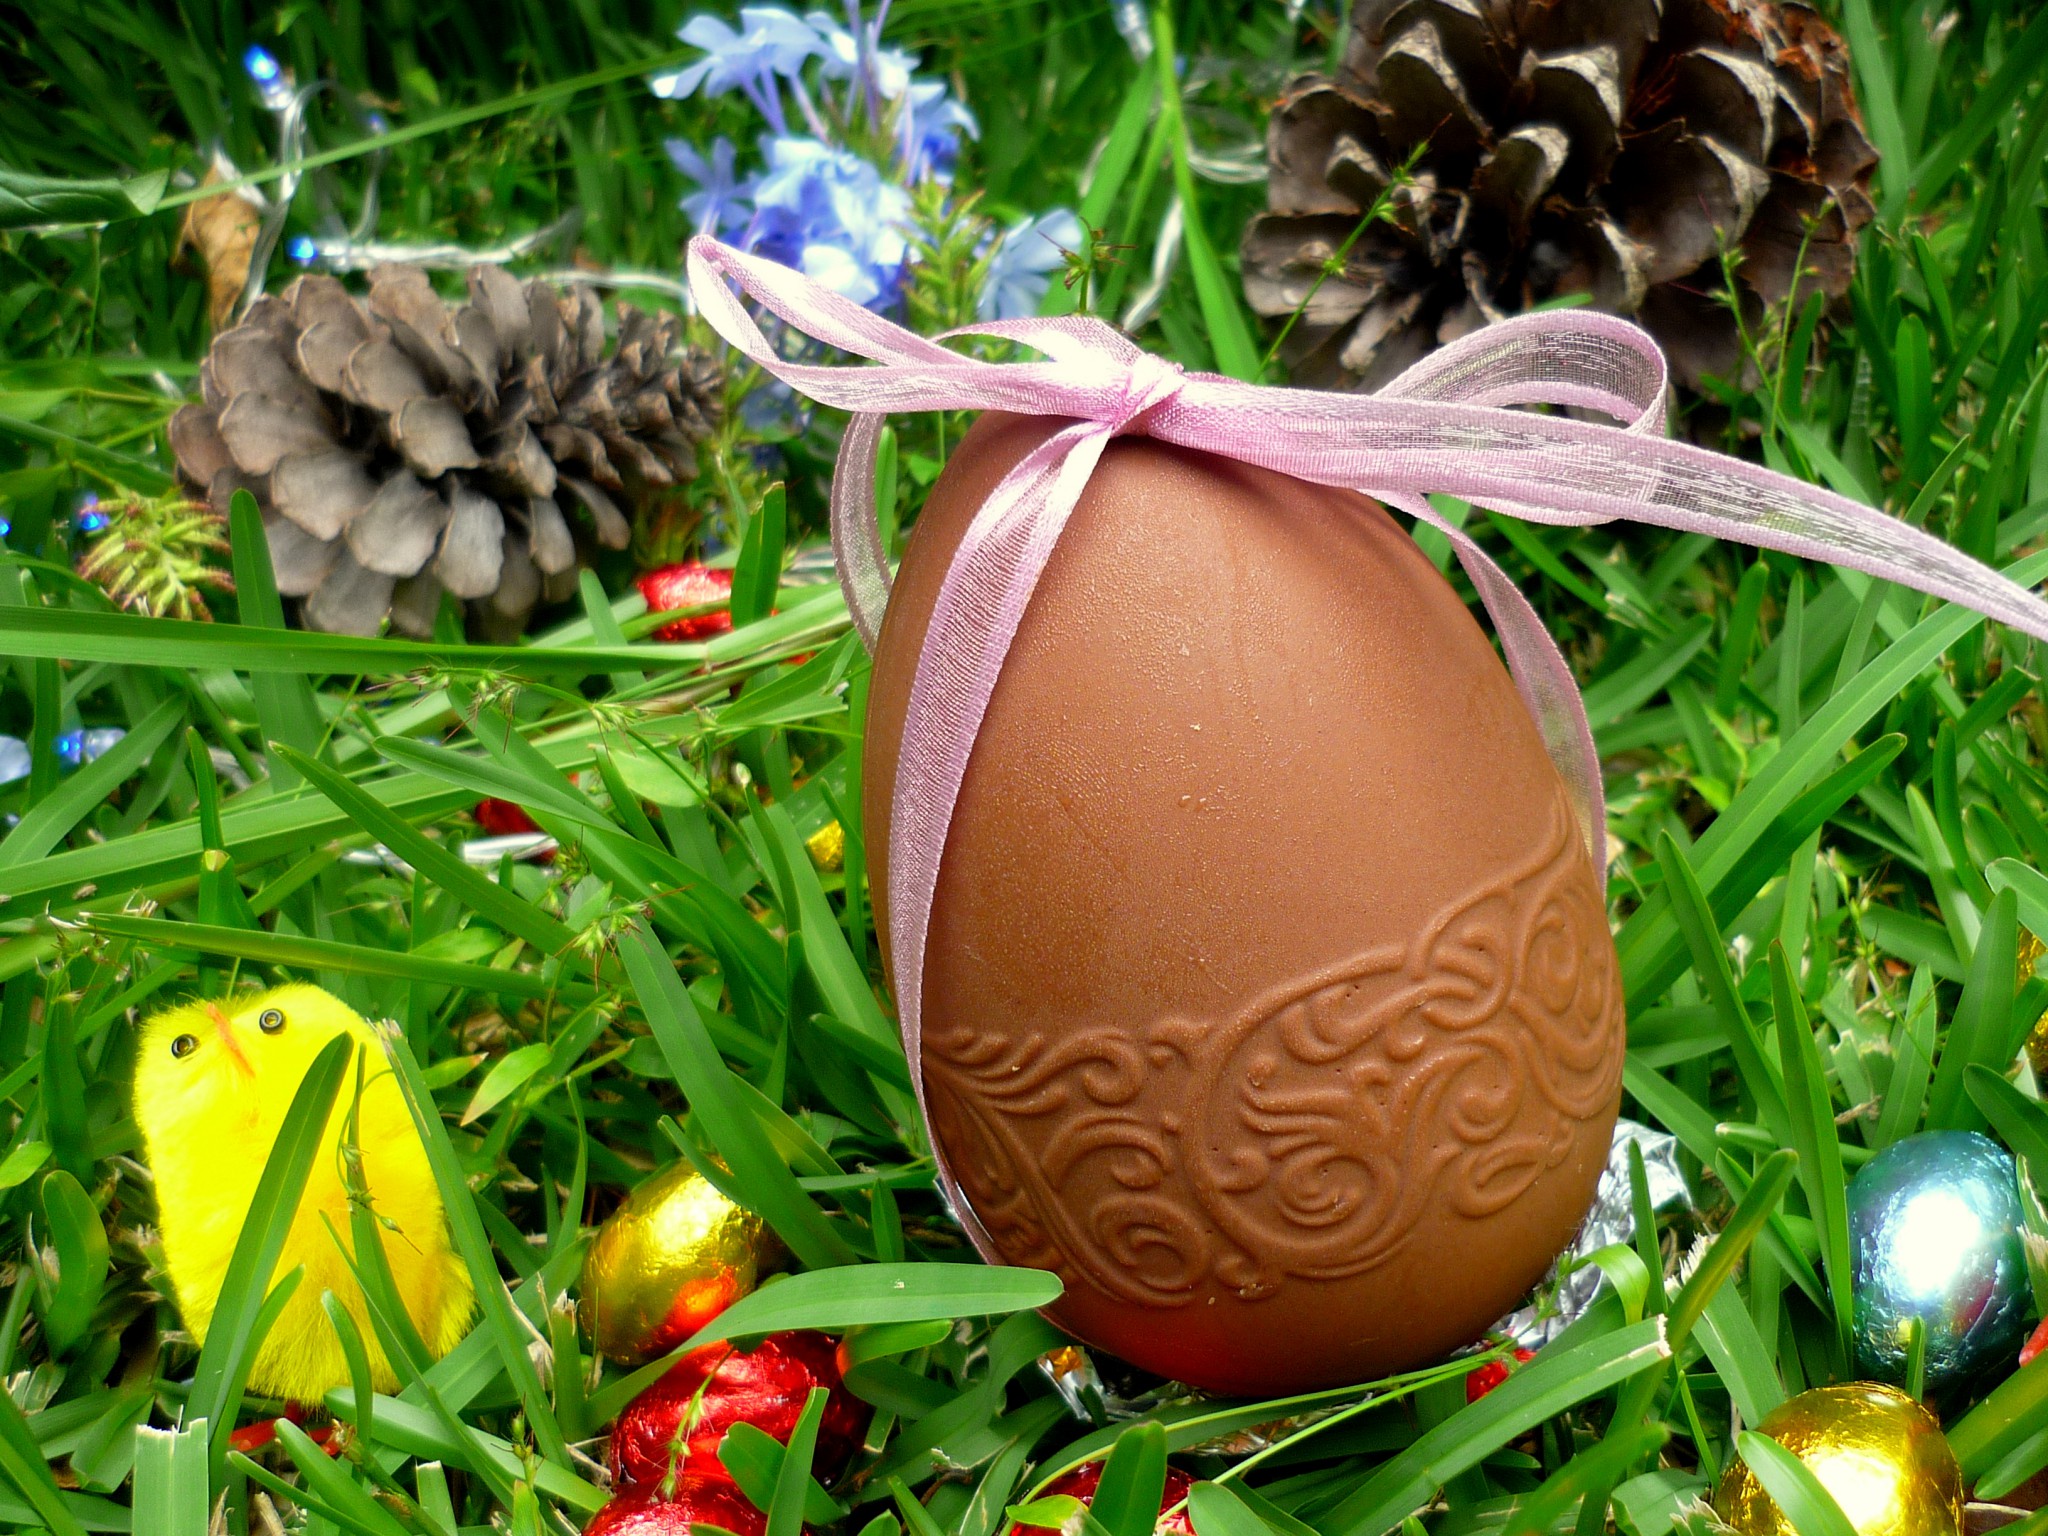 A Guide to the Easter Traditions in France - French Moments